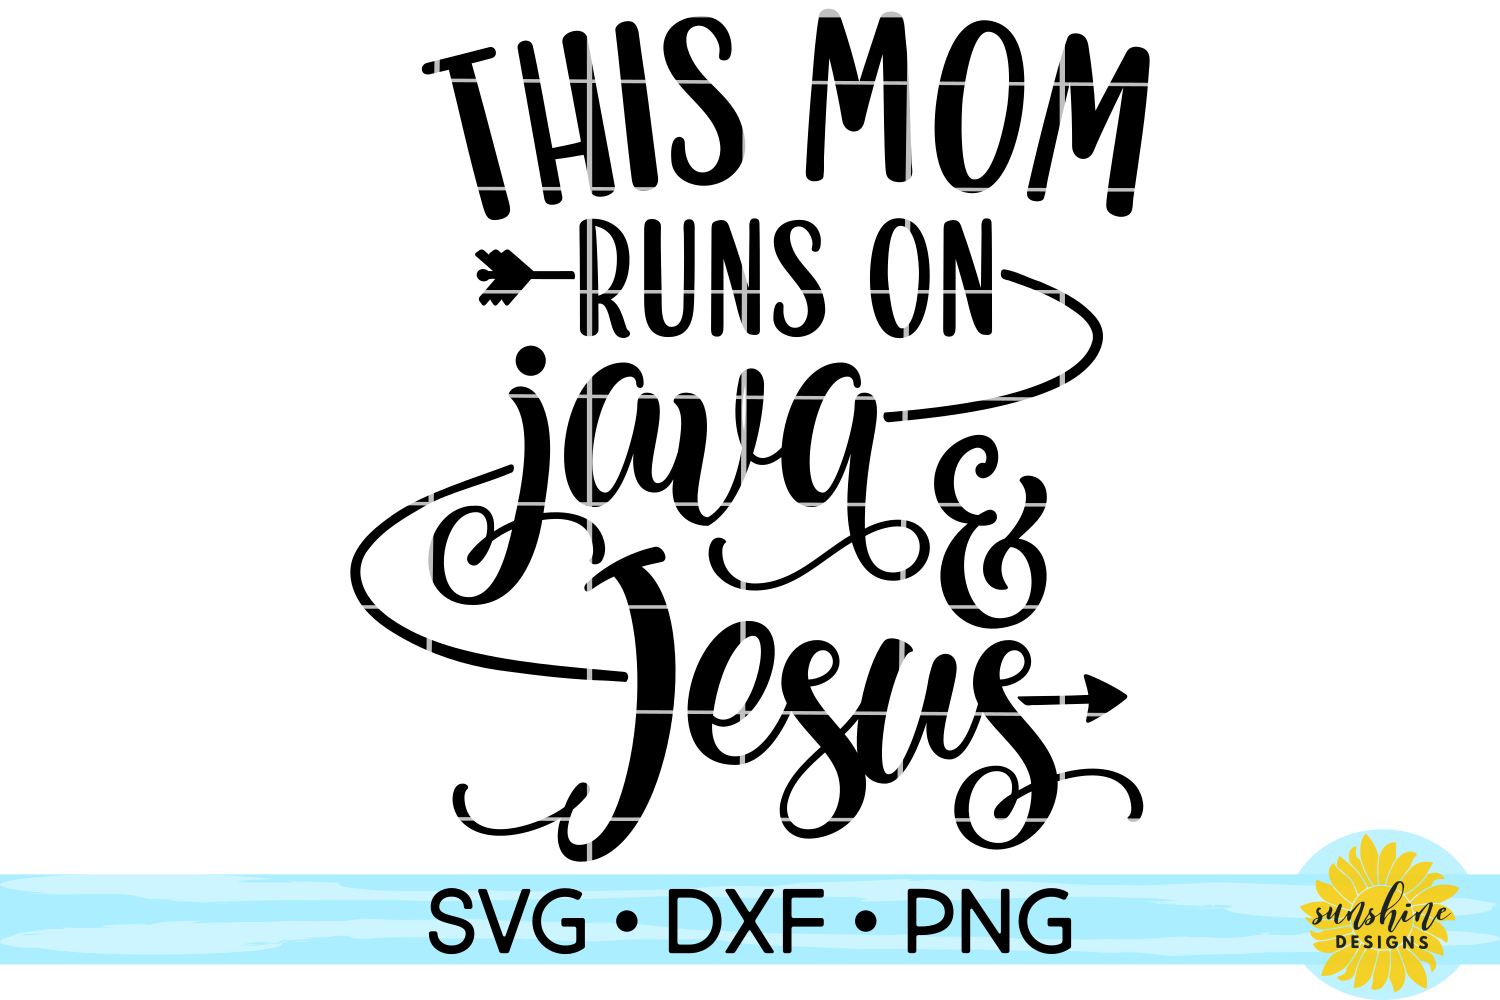 Download THIS MOM RUNS ON JAVA & JESUS SVG DXF PNG